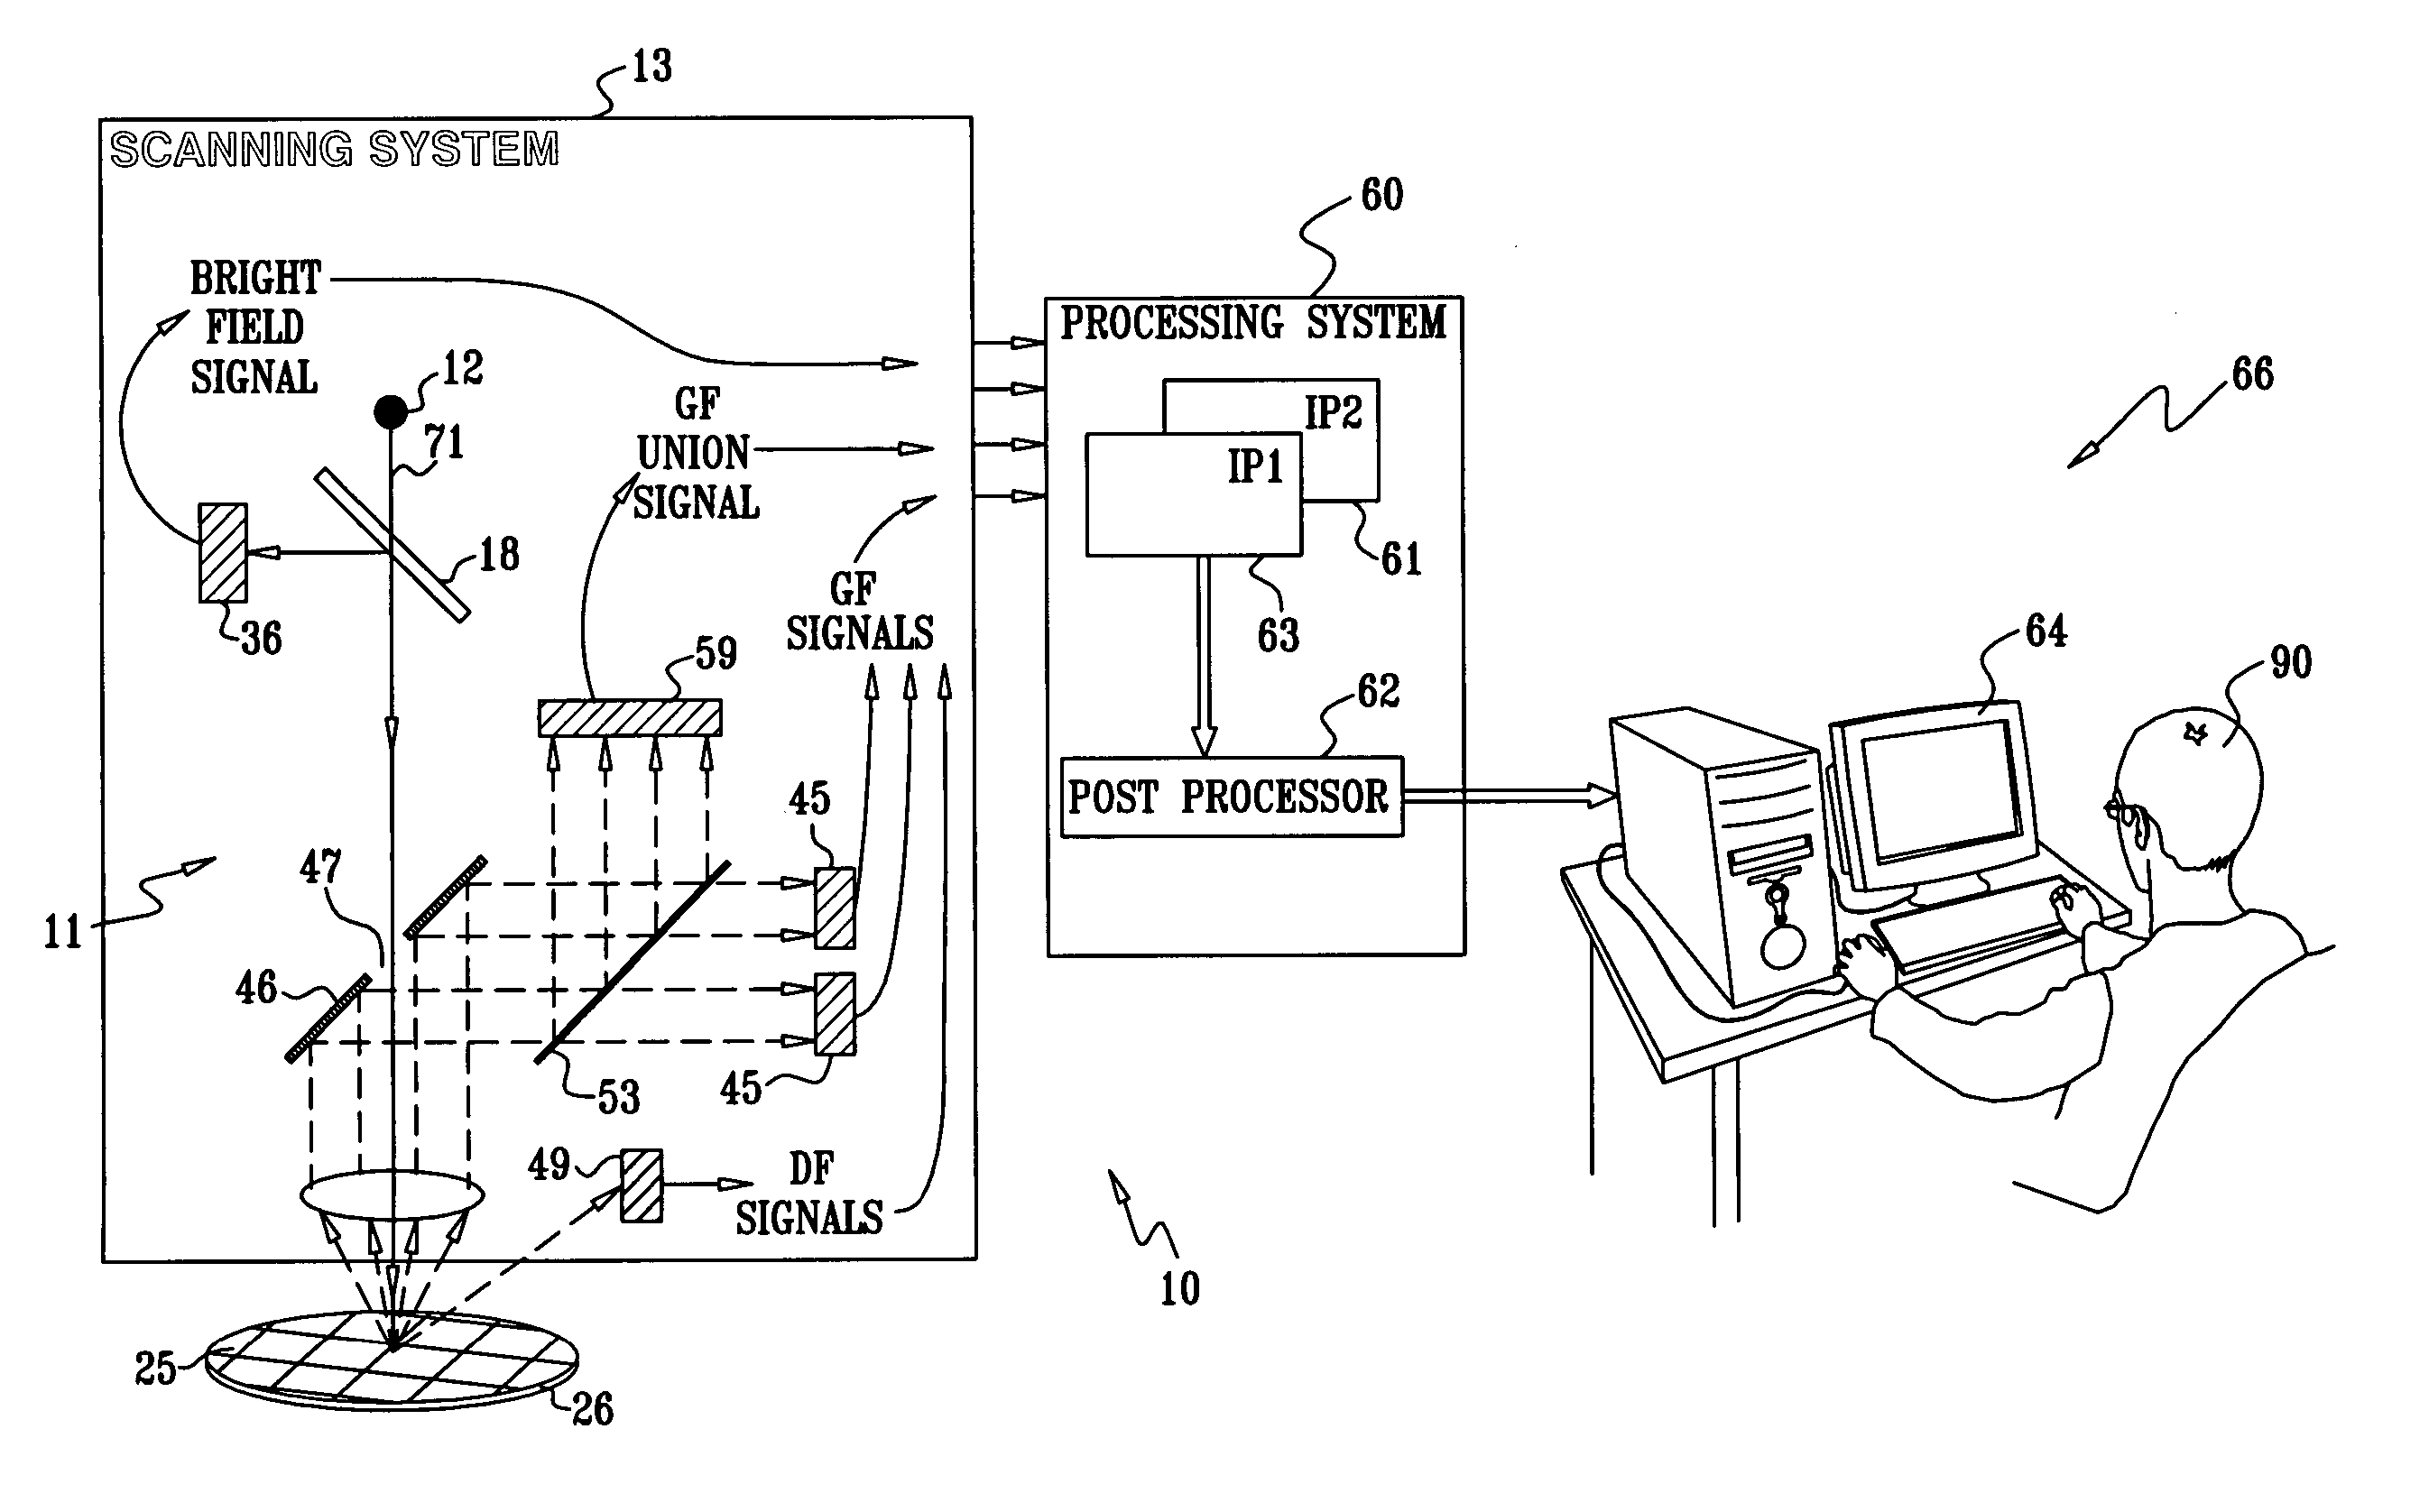 Method for filtering nuisance defects